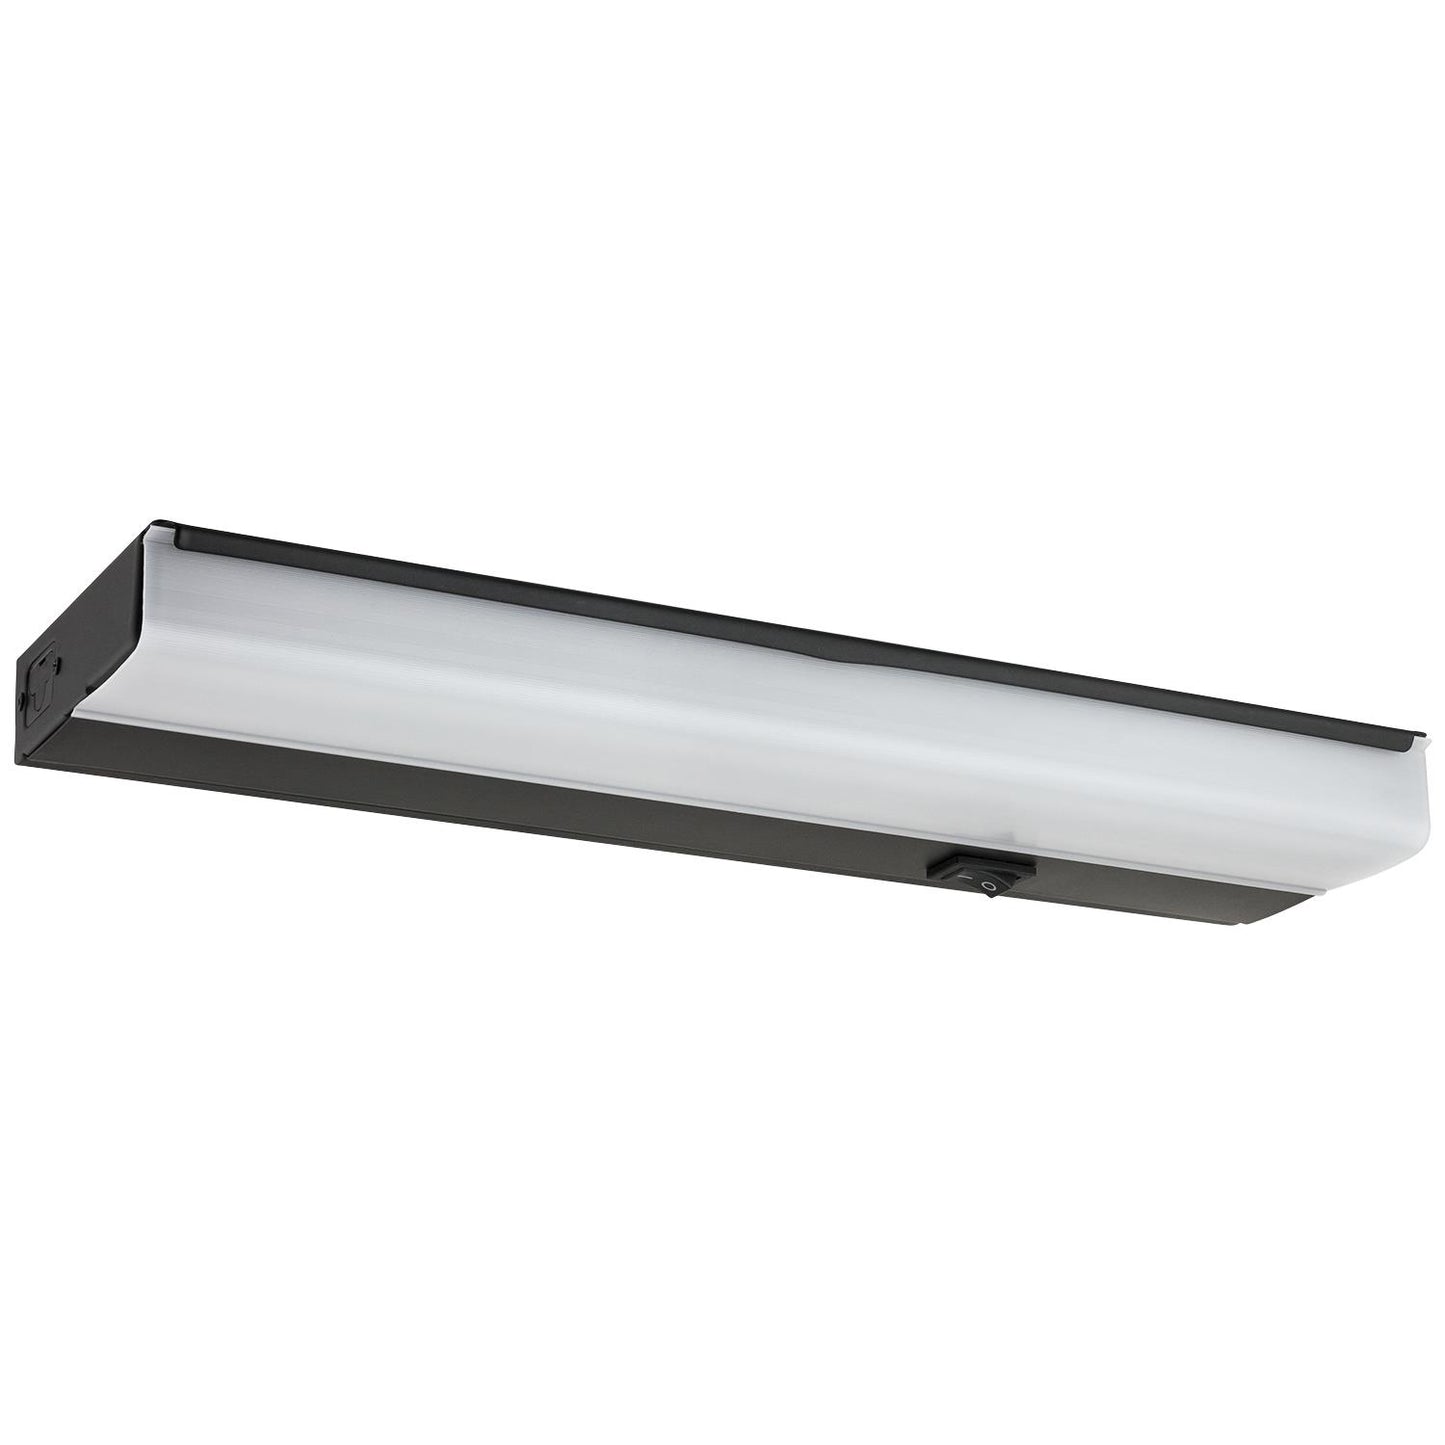 Sunlite 53076-SU 12-Inch LED Under Cabinet Light  Fixture, 8 Watts, (40w Equivalent), 400 Lumens, 90 CRI, Dimmable, Linkable, Black Finish, ETL Listed, 30K - Warm White